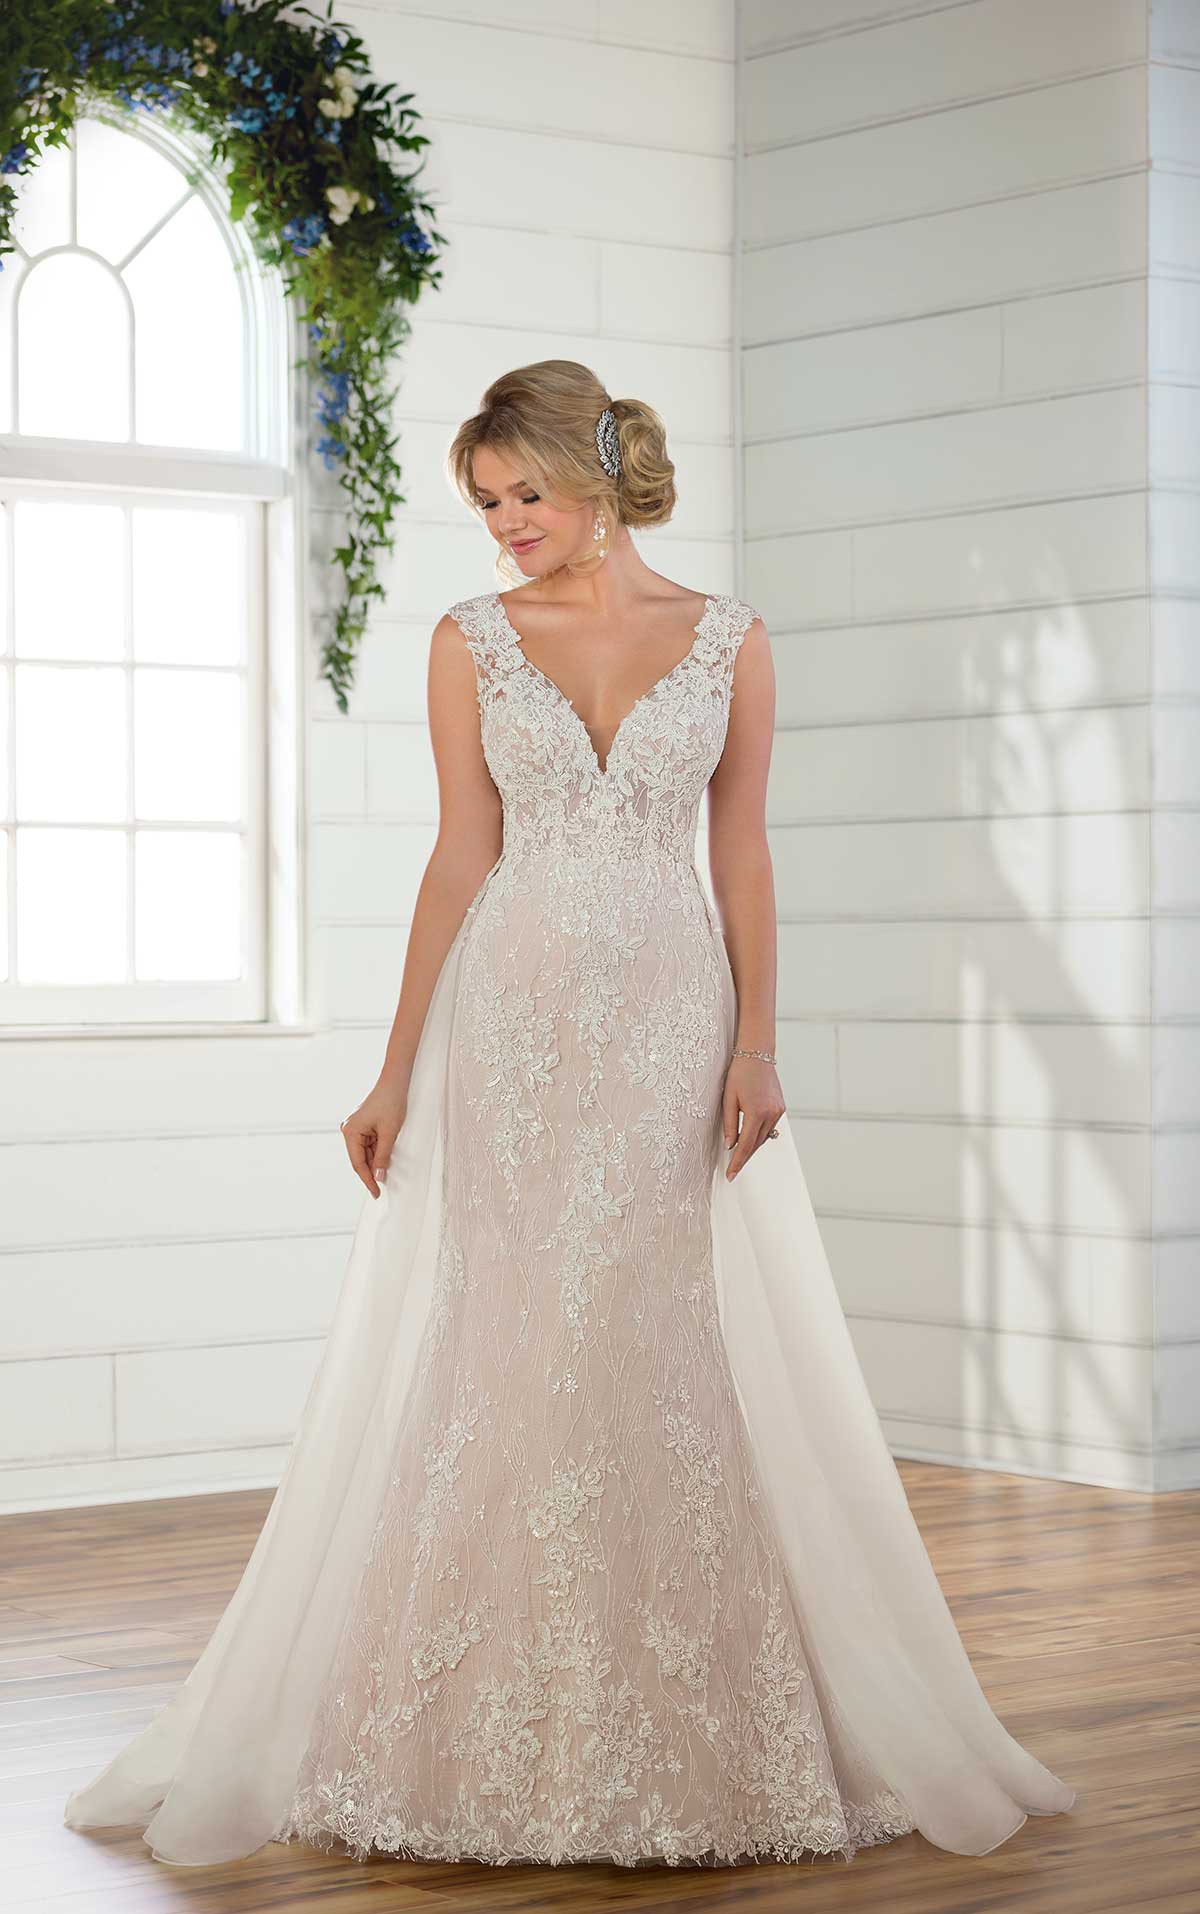 Essence of Australia Wedding Dresses, Fantastic Finds - SPARKLY  FIT-AND-FLARE LACE WEDDING DRESS WITH BEADED BACK DETAIL